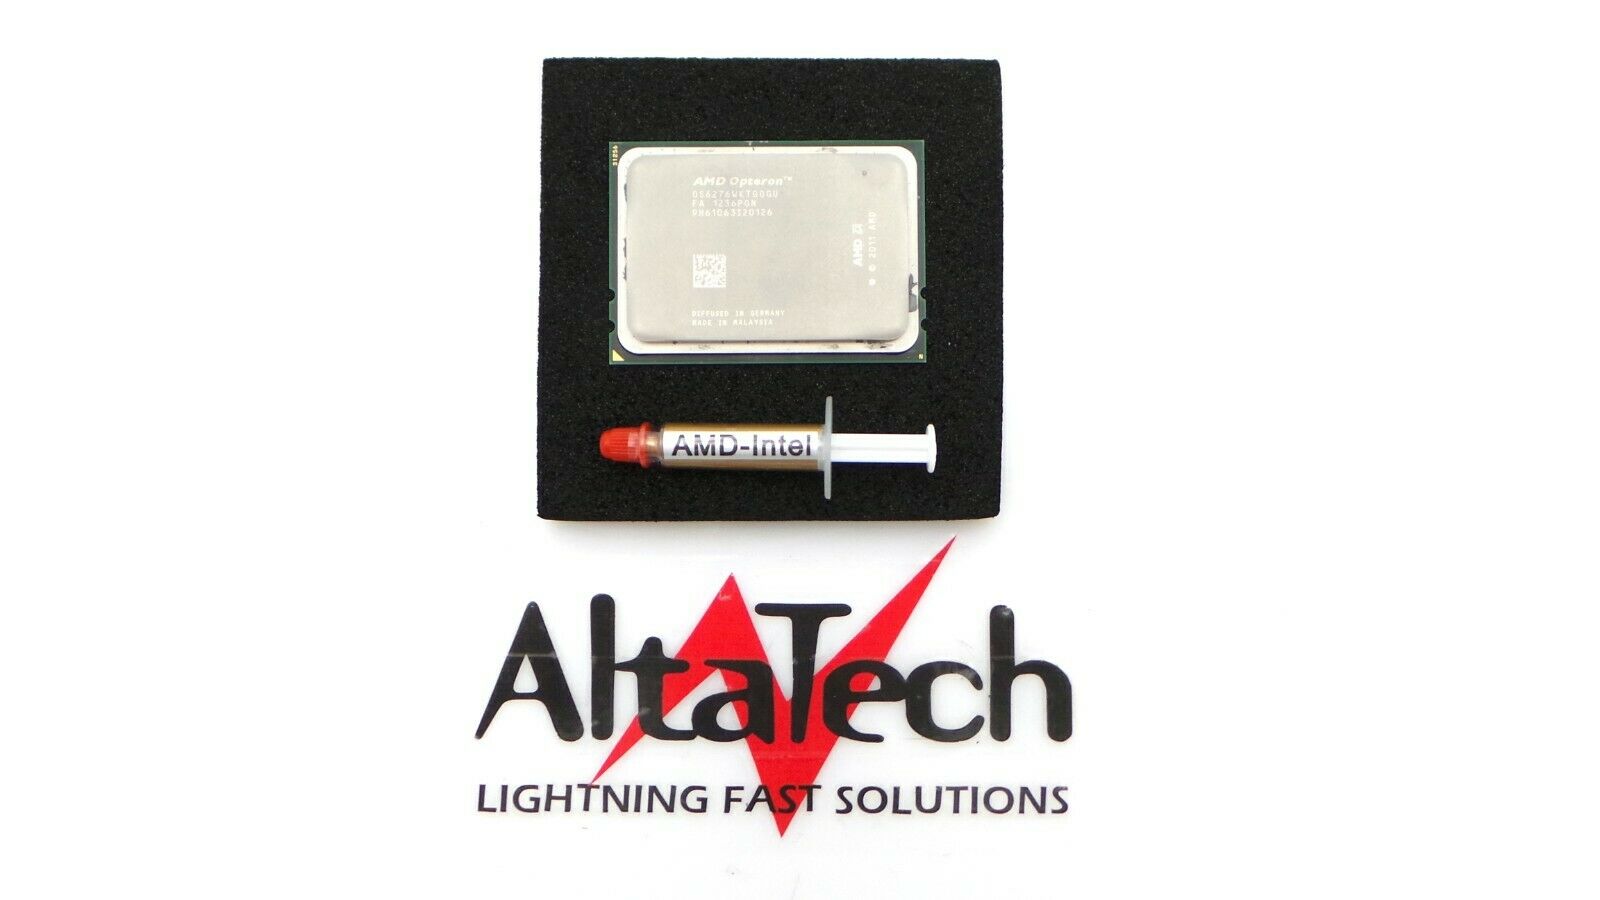 AMD OS6276WKTGGGU AMD Opteron 6276 16-Core 2.3GHz Processor w/ Thermal Grease, Used